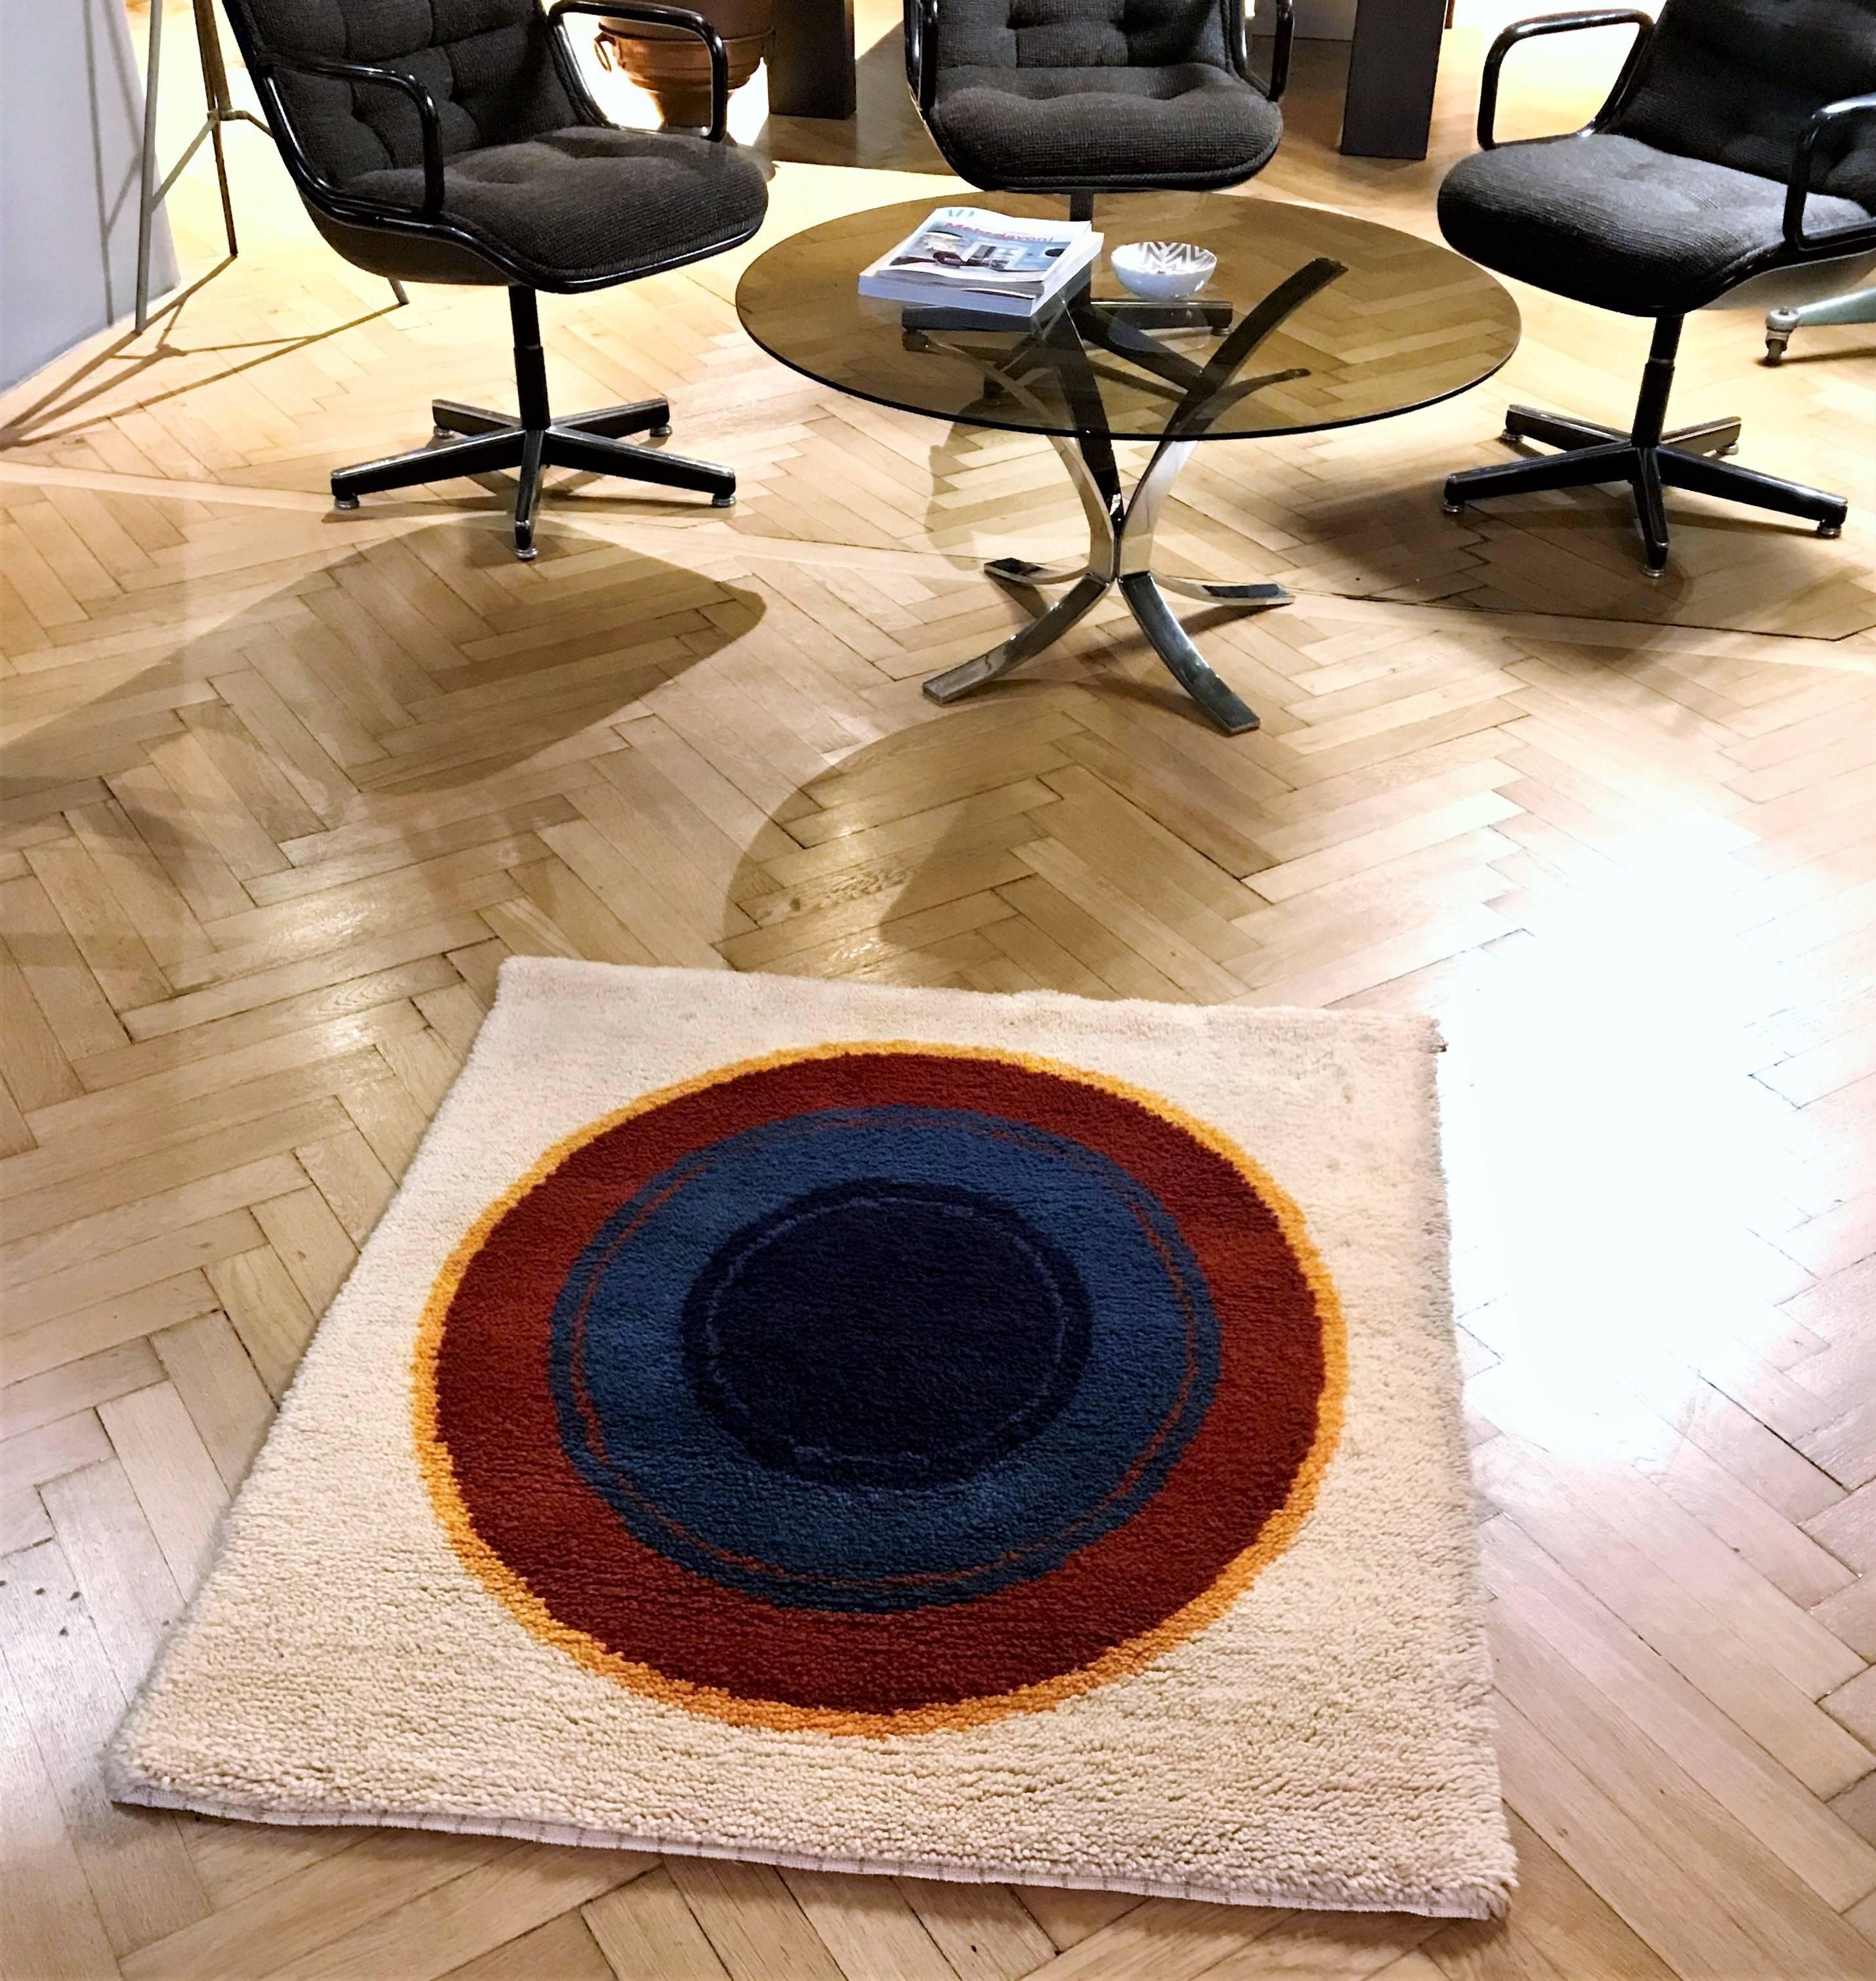 Vintage Austrian hand knotted wool carpet from the late 1970s. It was hanging on the wall since its creation. It can be also used as a floor carpet.
The creator was inspired by 20th century genius artist Kenneth Noland and his Target